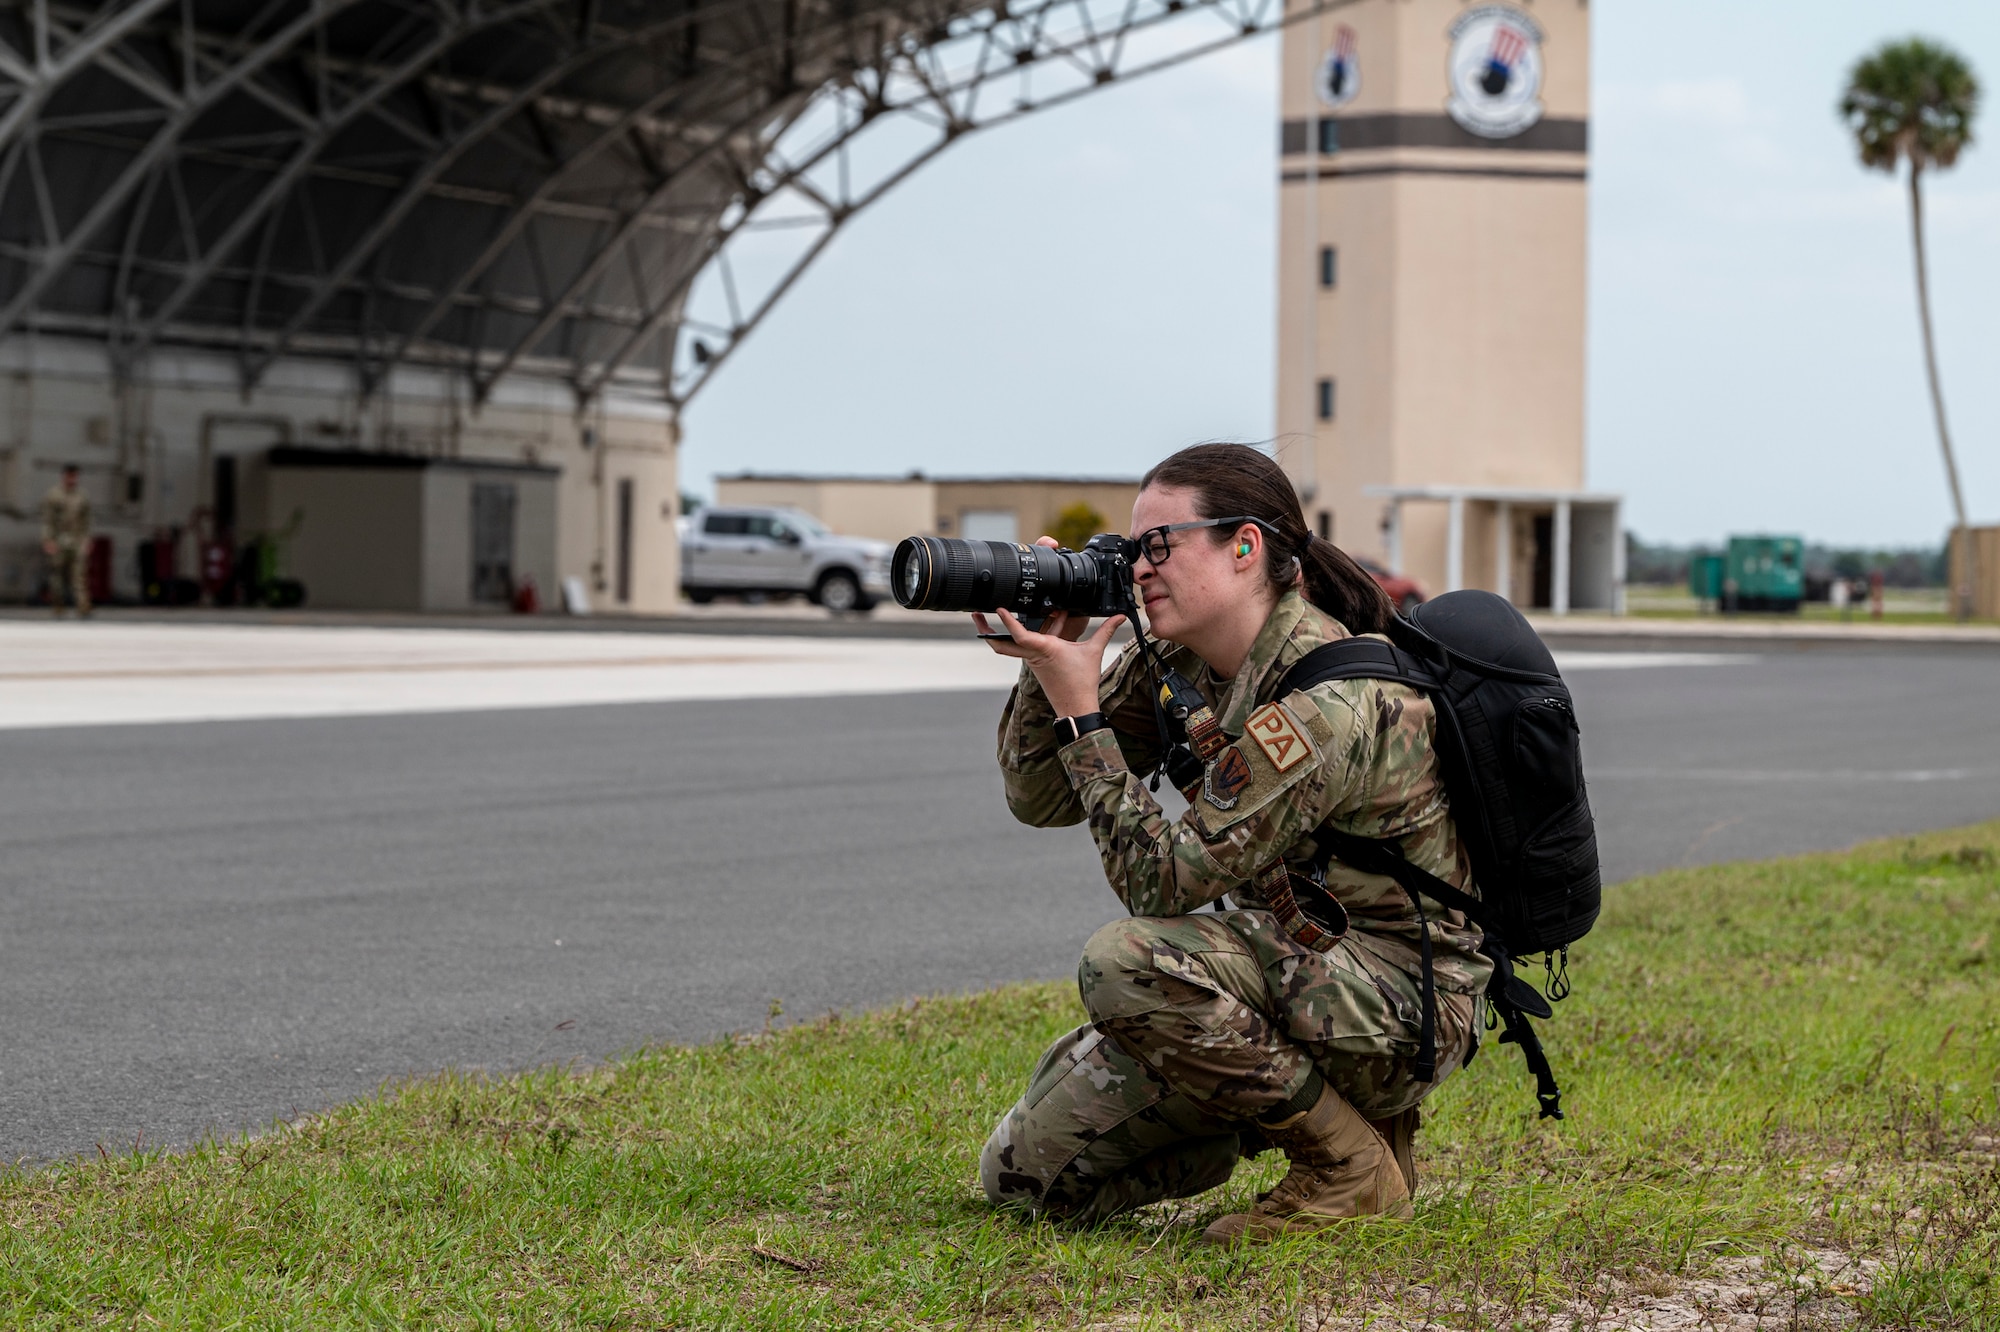 U.S. Air Force Senior Airman Rachel Coates, 23rd Wing Public Affairs specialist, takes photographs for exercise Ready Tiger 24-1 at Avon Park Air Force Range, Florida, April 9, 2024. PA Airmen are instrumental in documenting footage of exercises for command messaging and historical recording of military operations. (U.S. Air Force photo by Airman 1st Class Leonid Soubbotine)